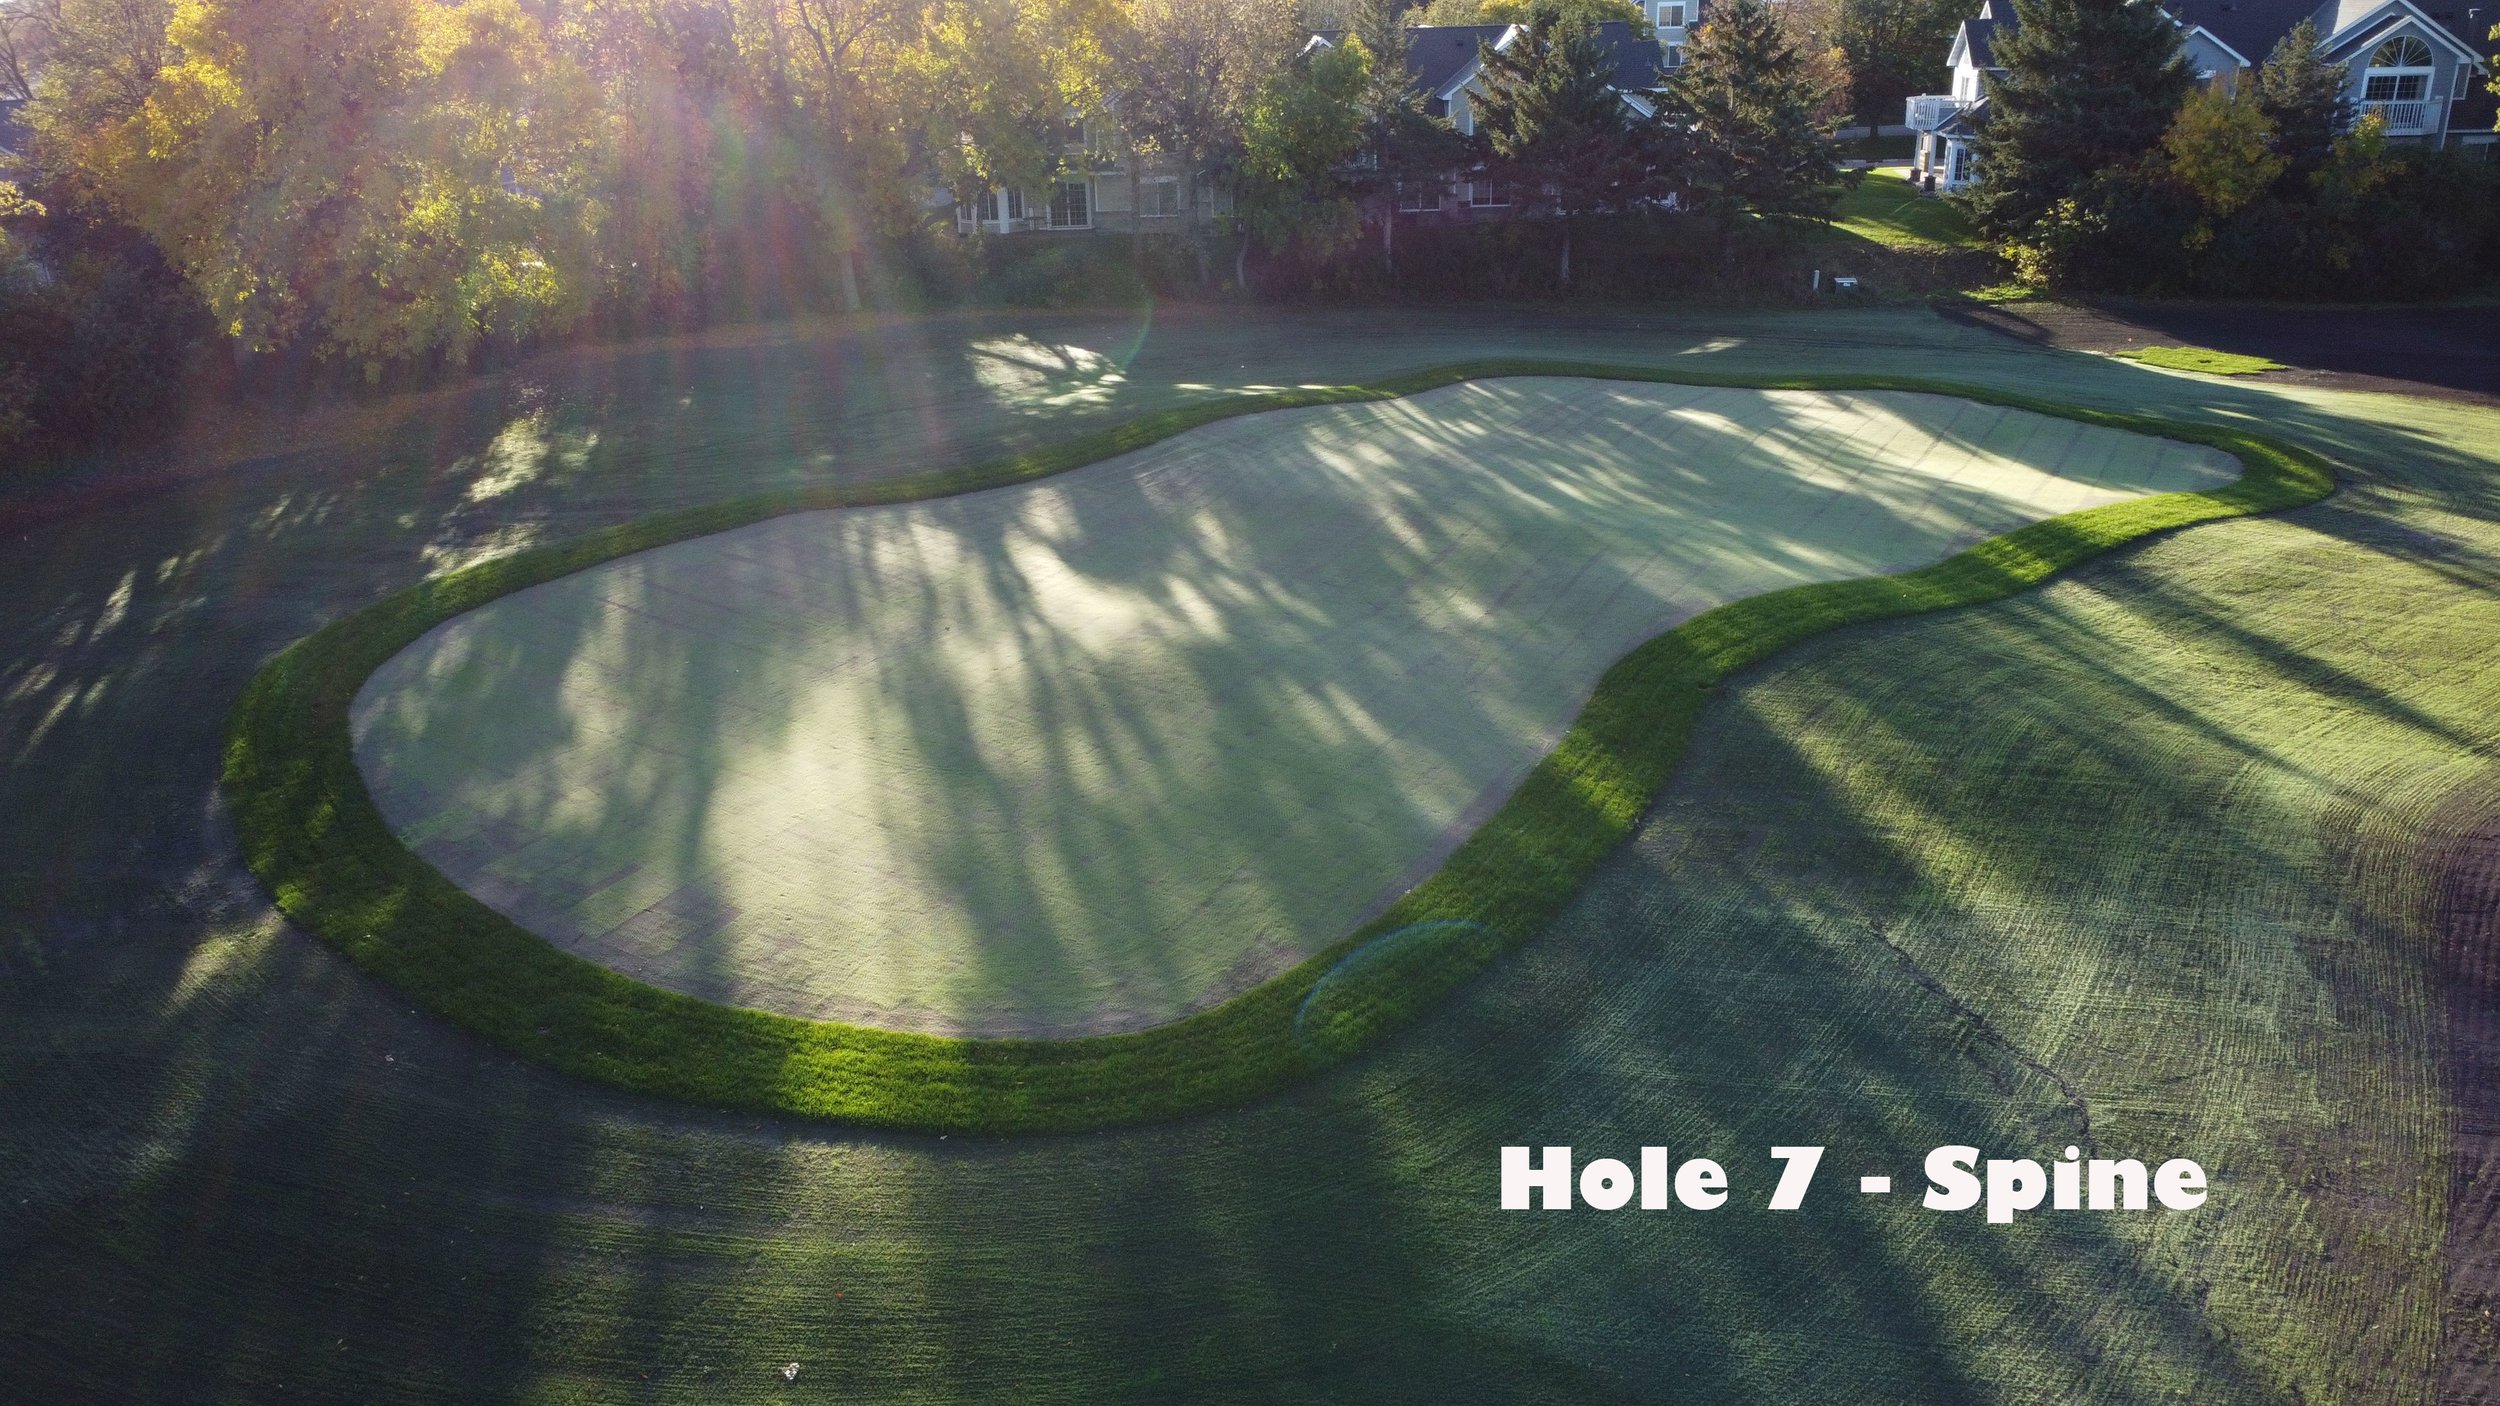  #7 Spine - 68 | 62 Green Shaped by Brett Hochstein  Our crumpled 7th green is built around a spine feature which extends towards the tee. The top of the spine can be pinned, but the majority of play will take place on the ‘wings’ of the putting surf